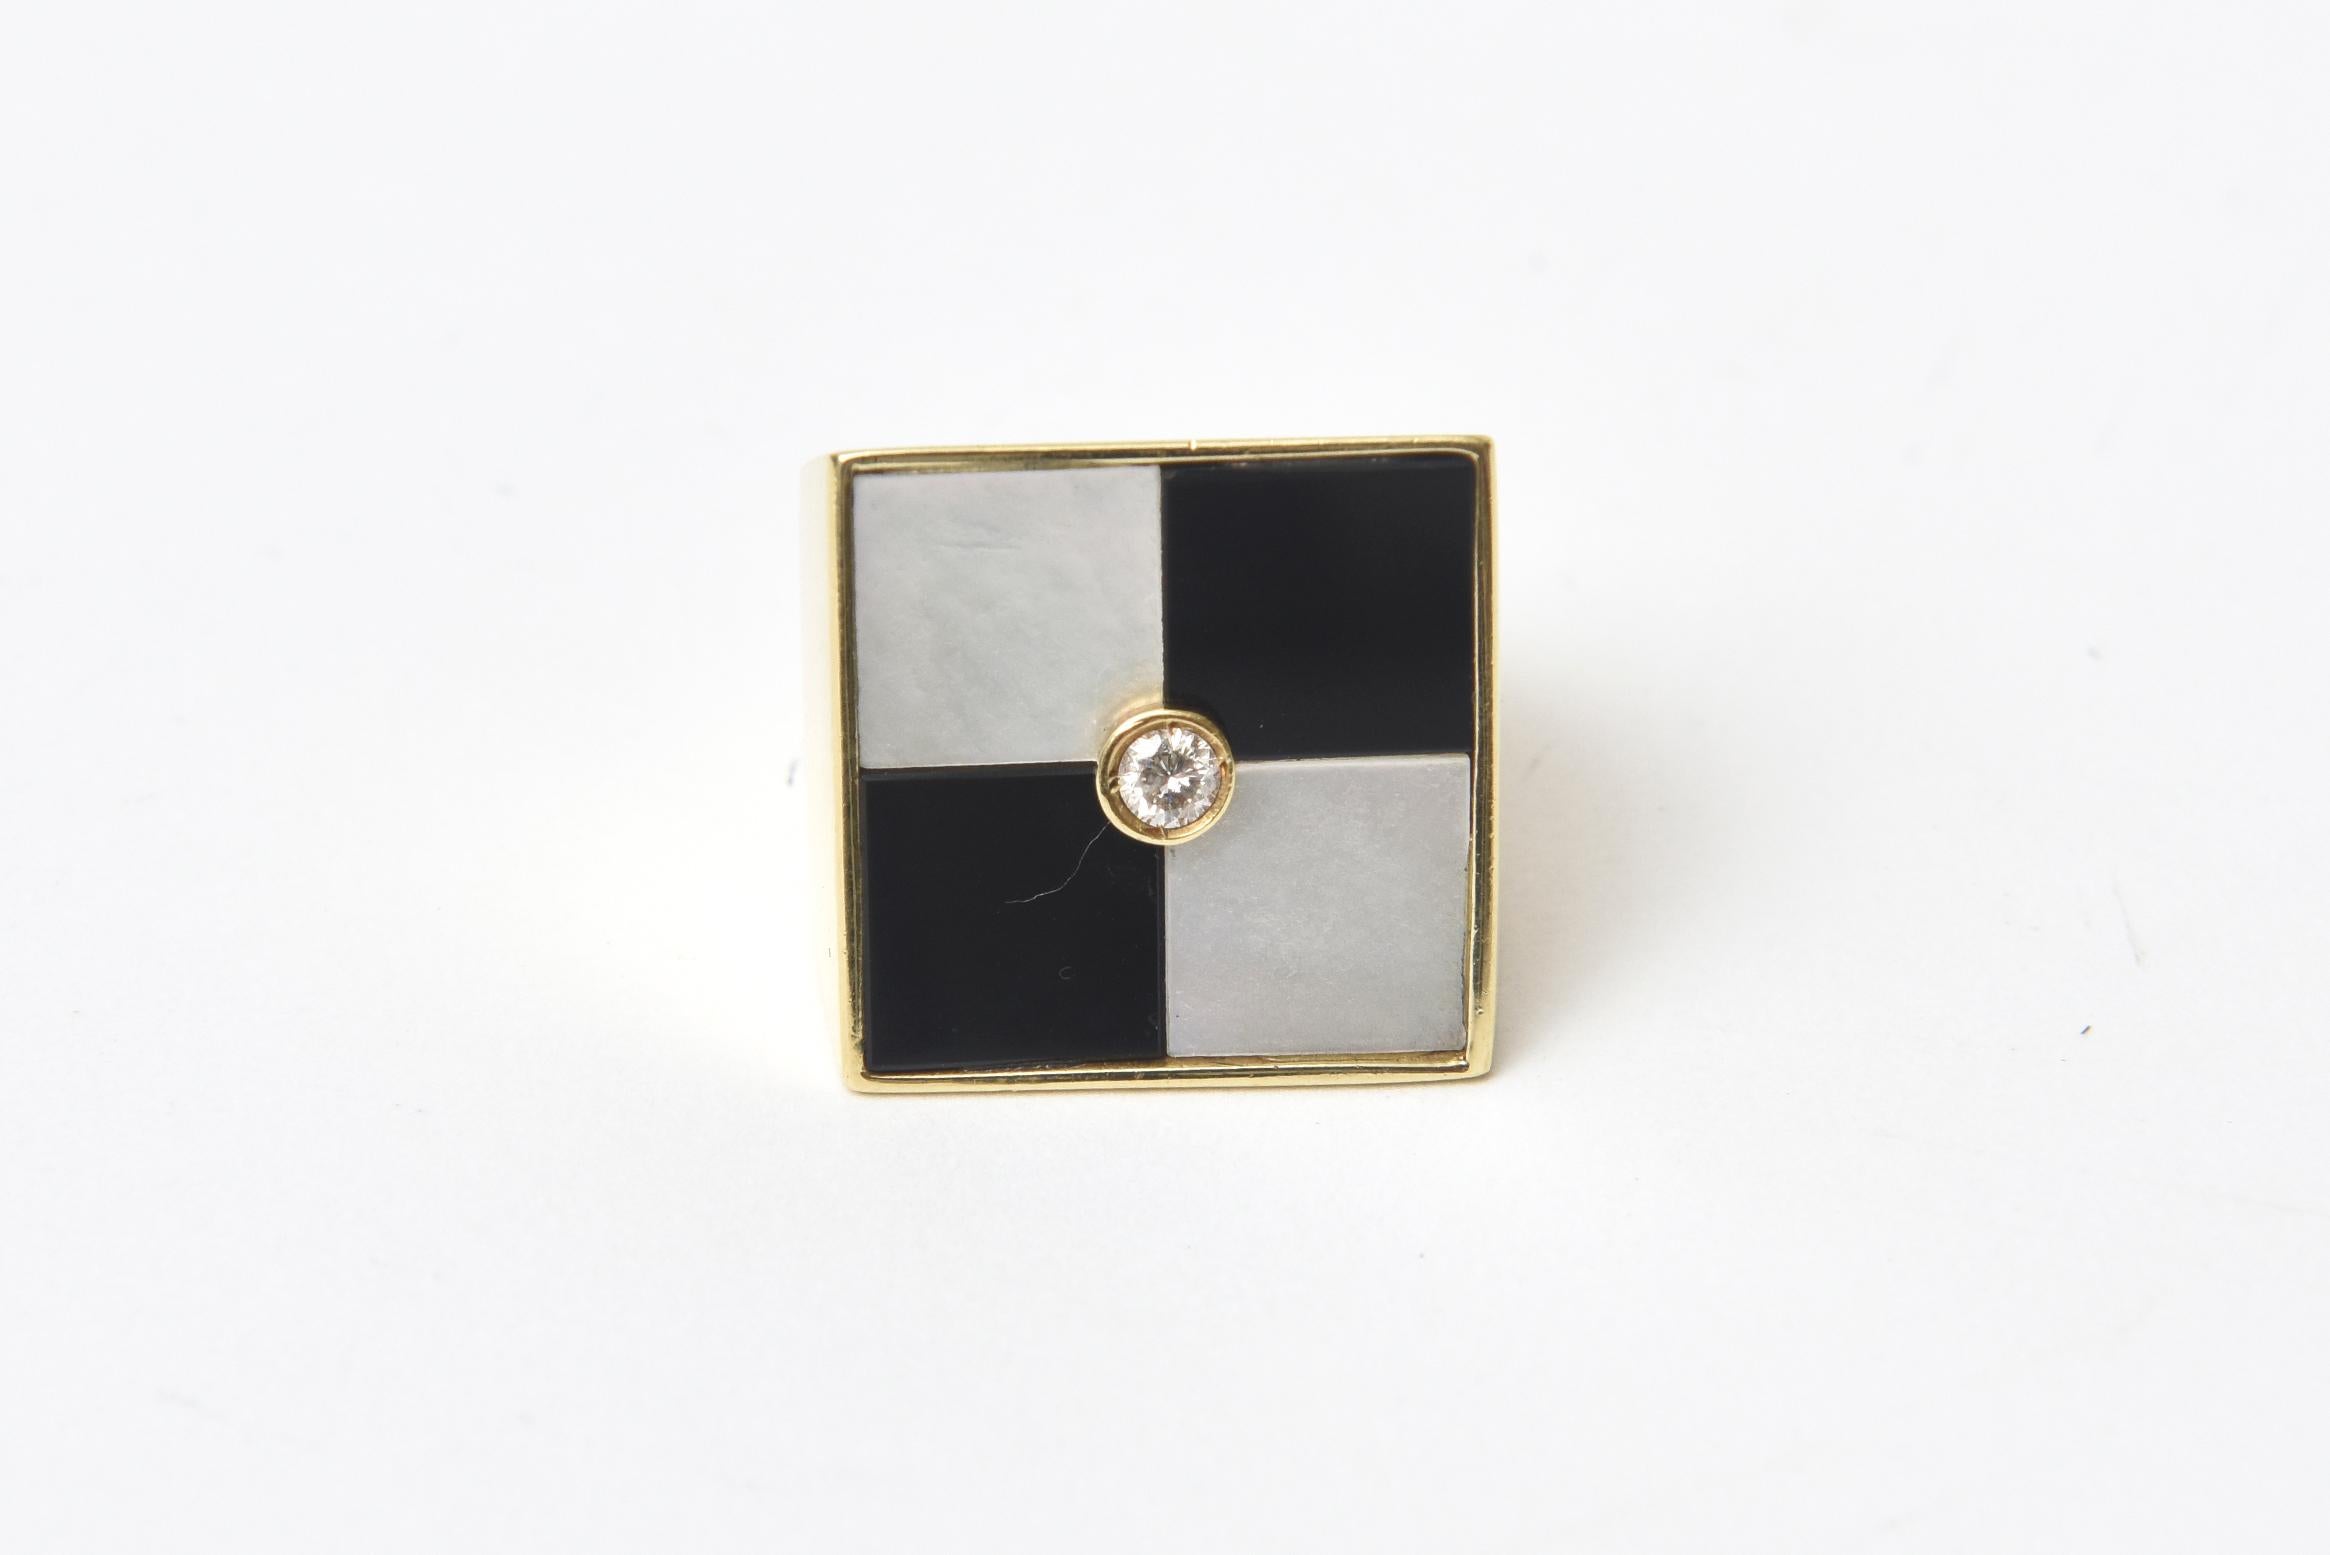 This stunning italian 1970's vintage Italian square 18K gold, onyx and mother of pearl ring is geometric and so courant today. it is marked 750 and is a size 7. There is a tiny diamond in the center. it is bold, graphic and chic! The play of black